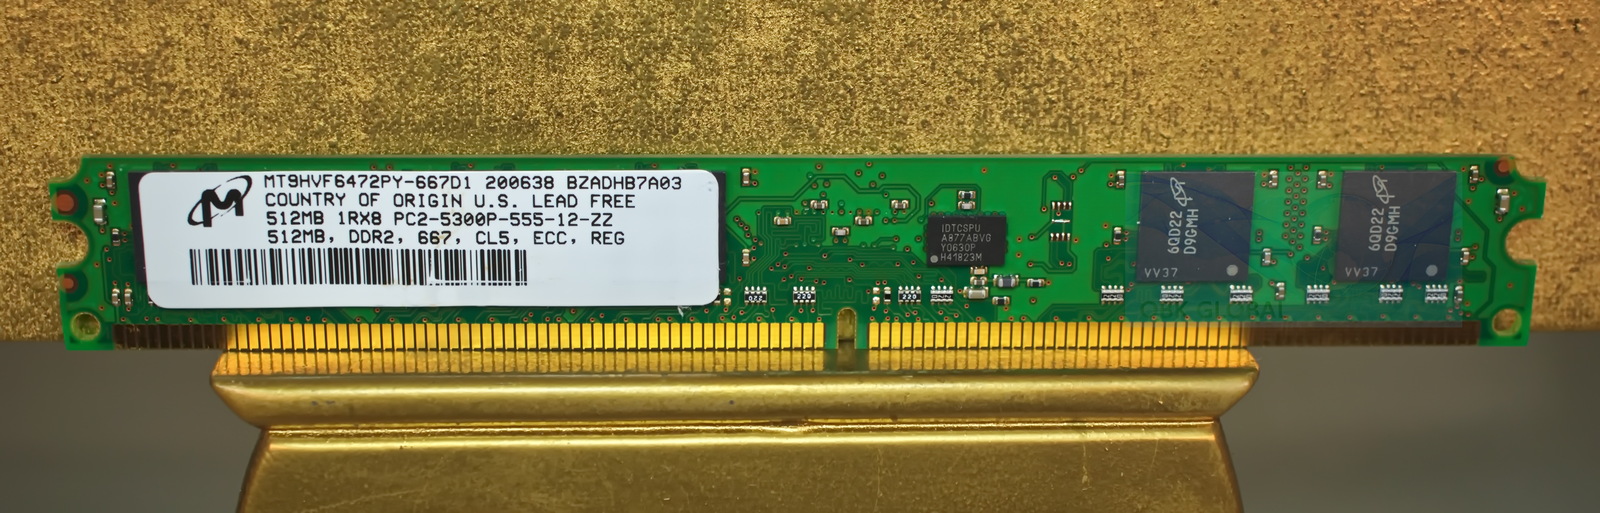 Primary image for MT9HVF6472PY-667D1 Micron 512MB PC2-5300 DDR2-667MHz ECC Registered CL5 240-Pin 